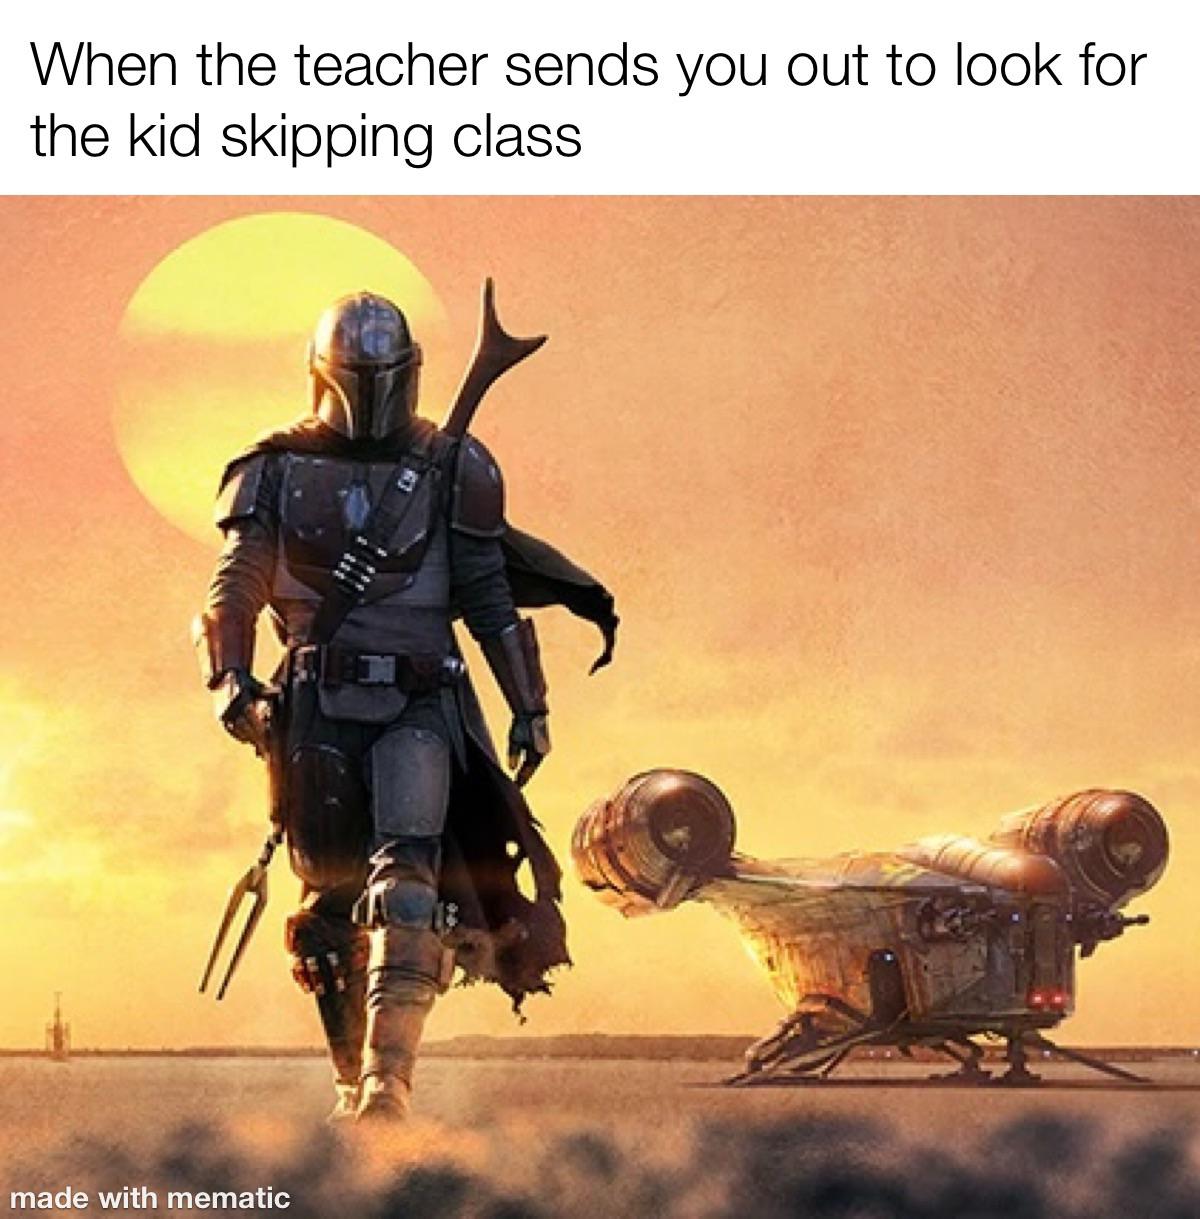 mandalorian sunset - When the teacher sends you out to look for the kid skipping class made with mematic